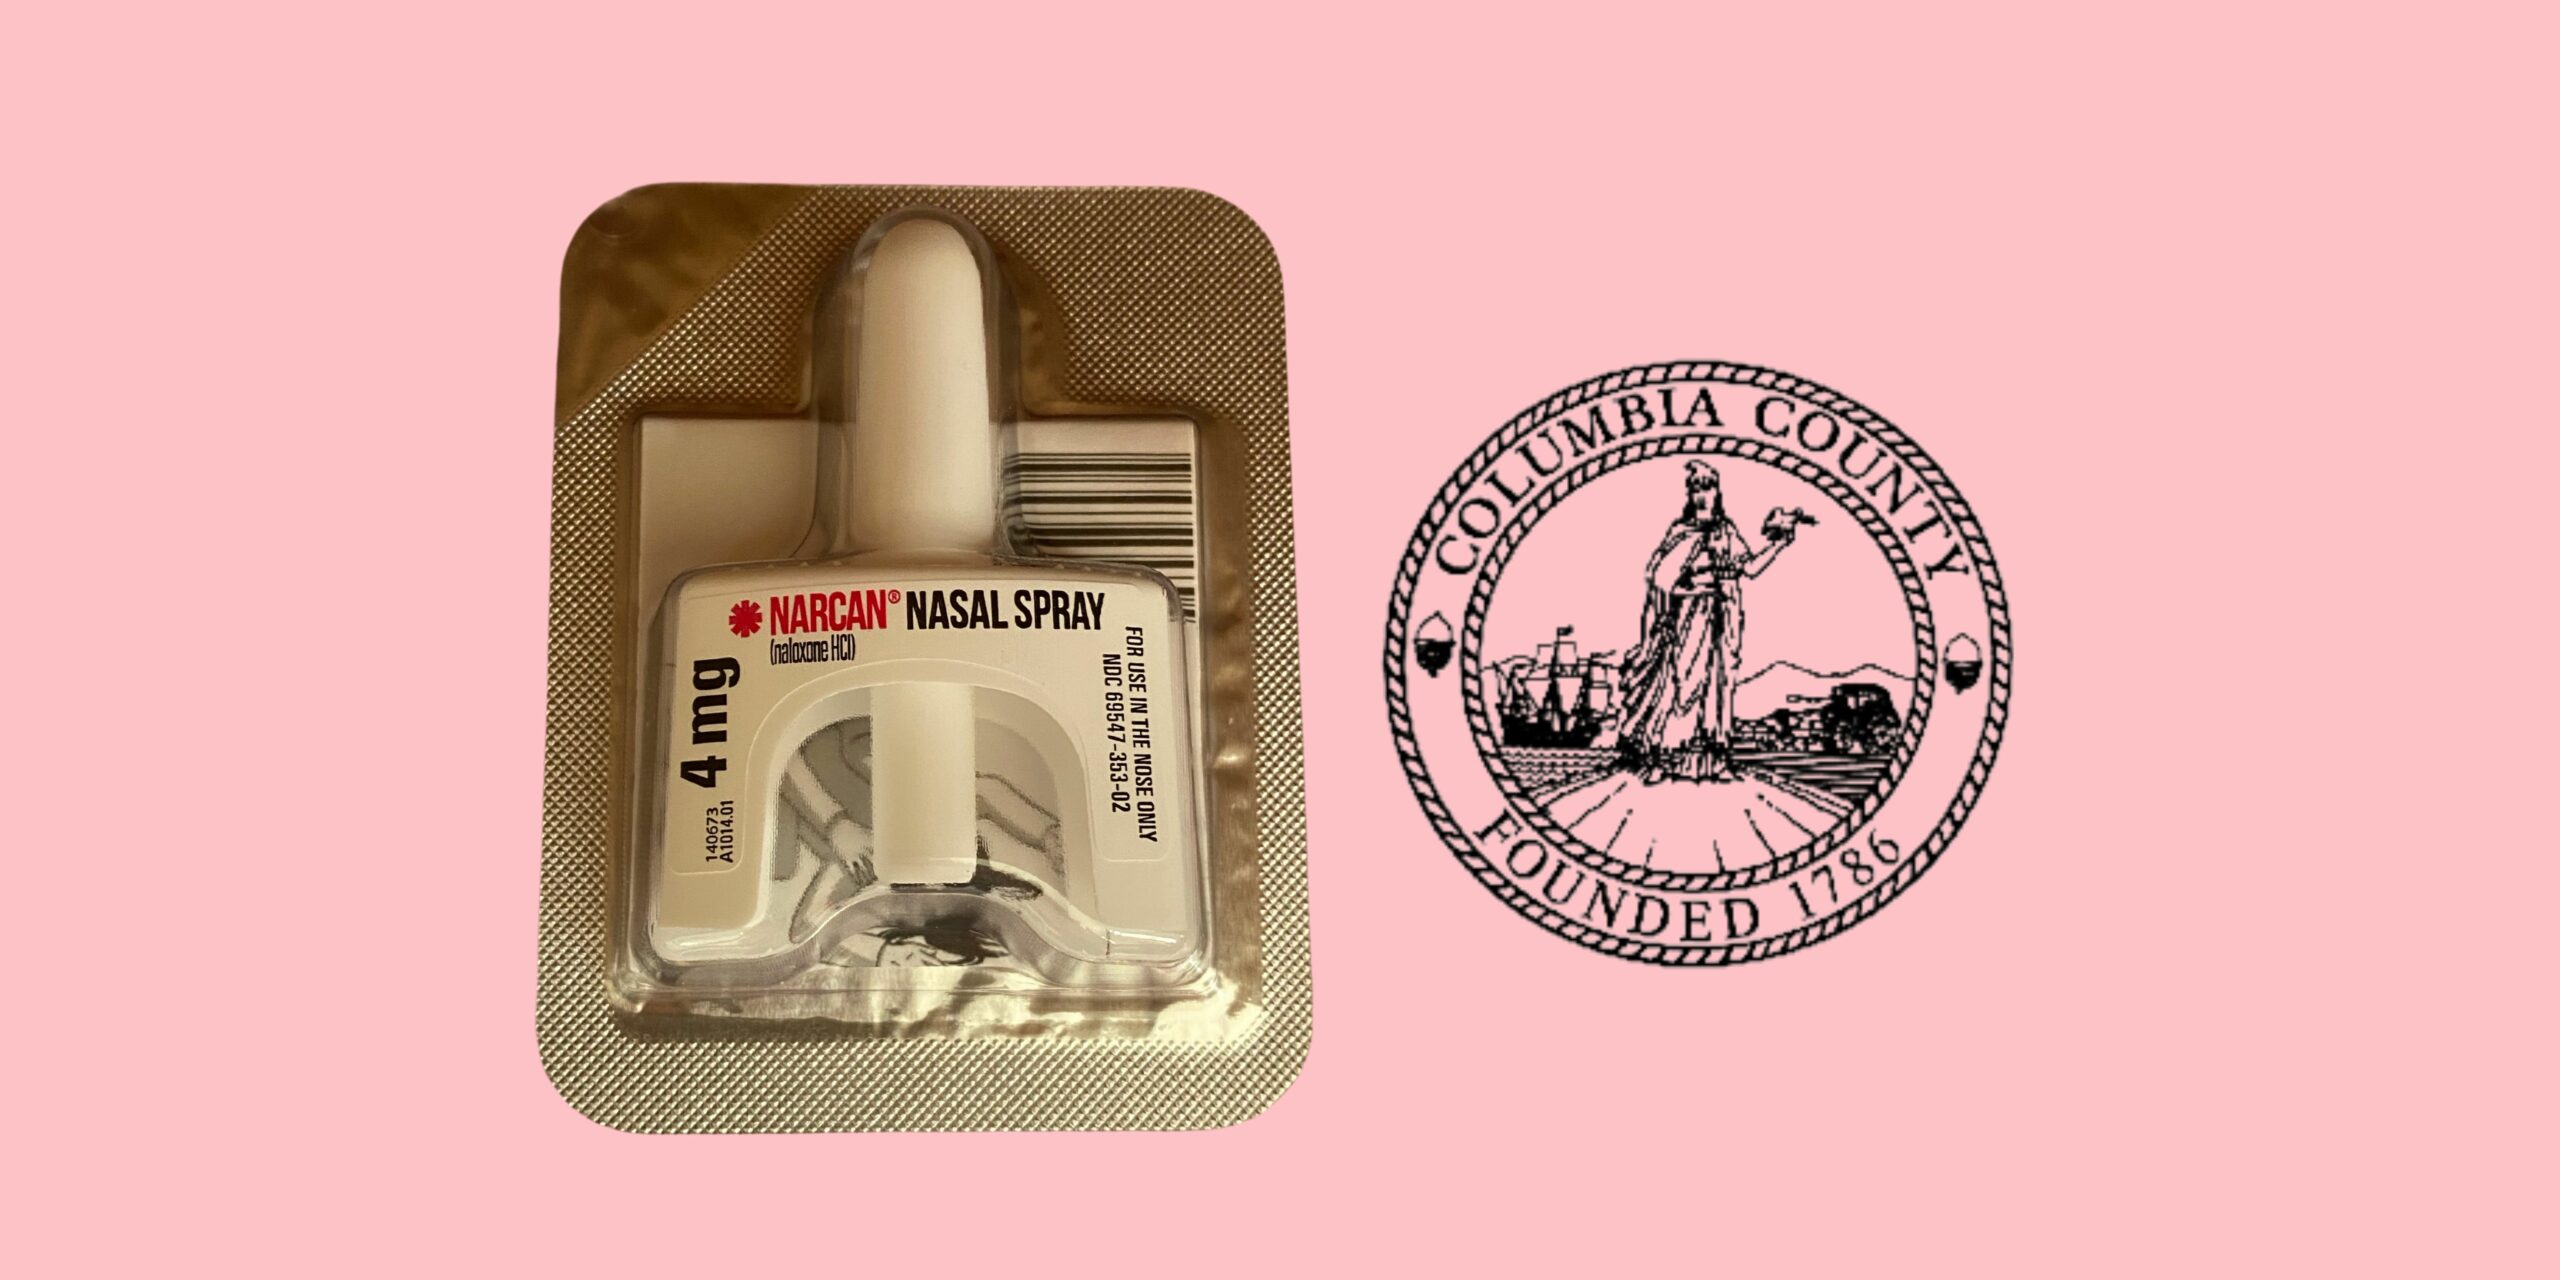 Columbia County Narcan Training image and logo